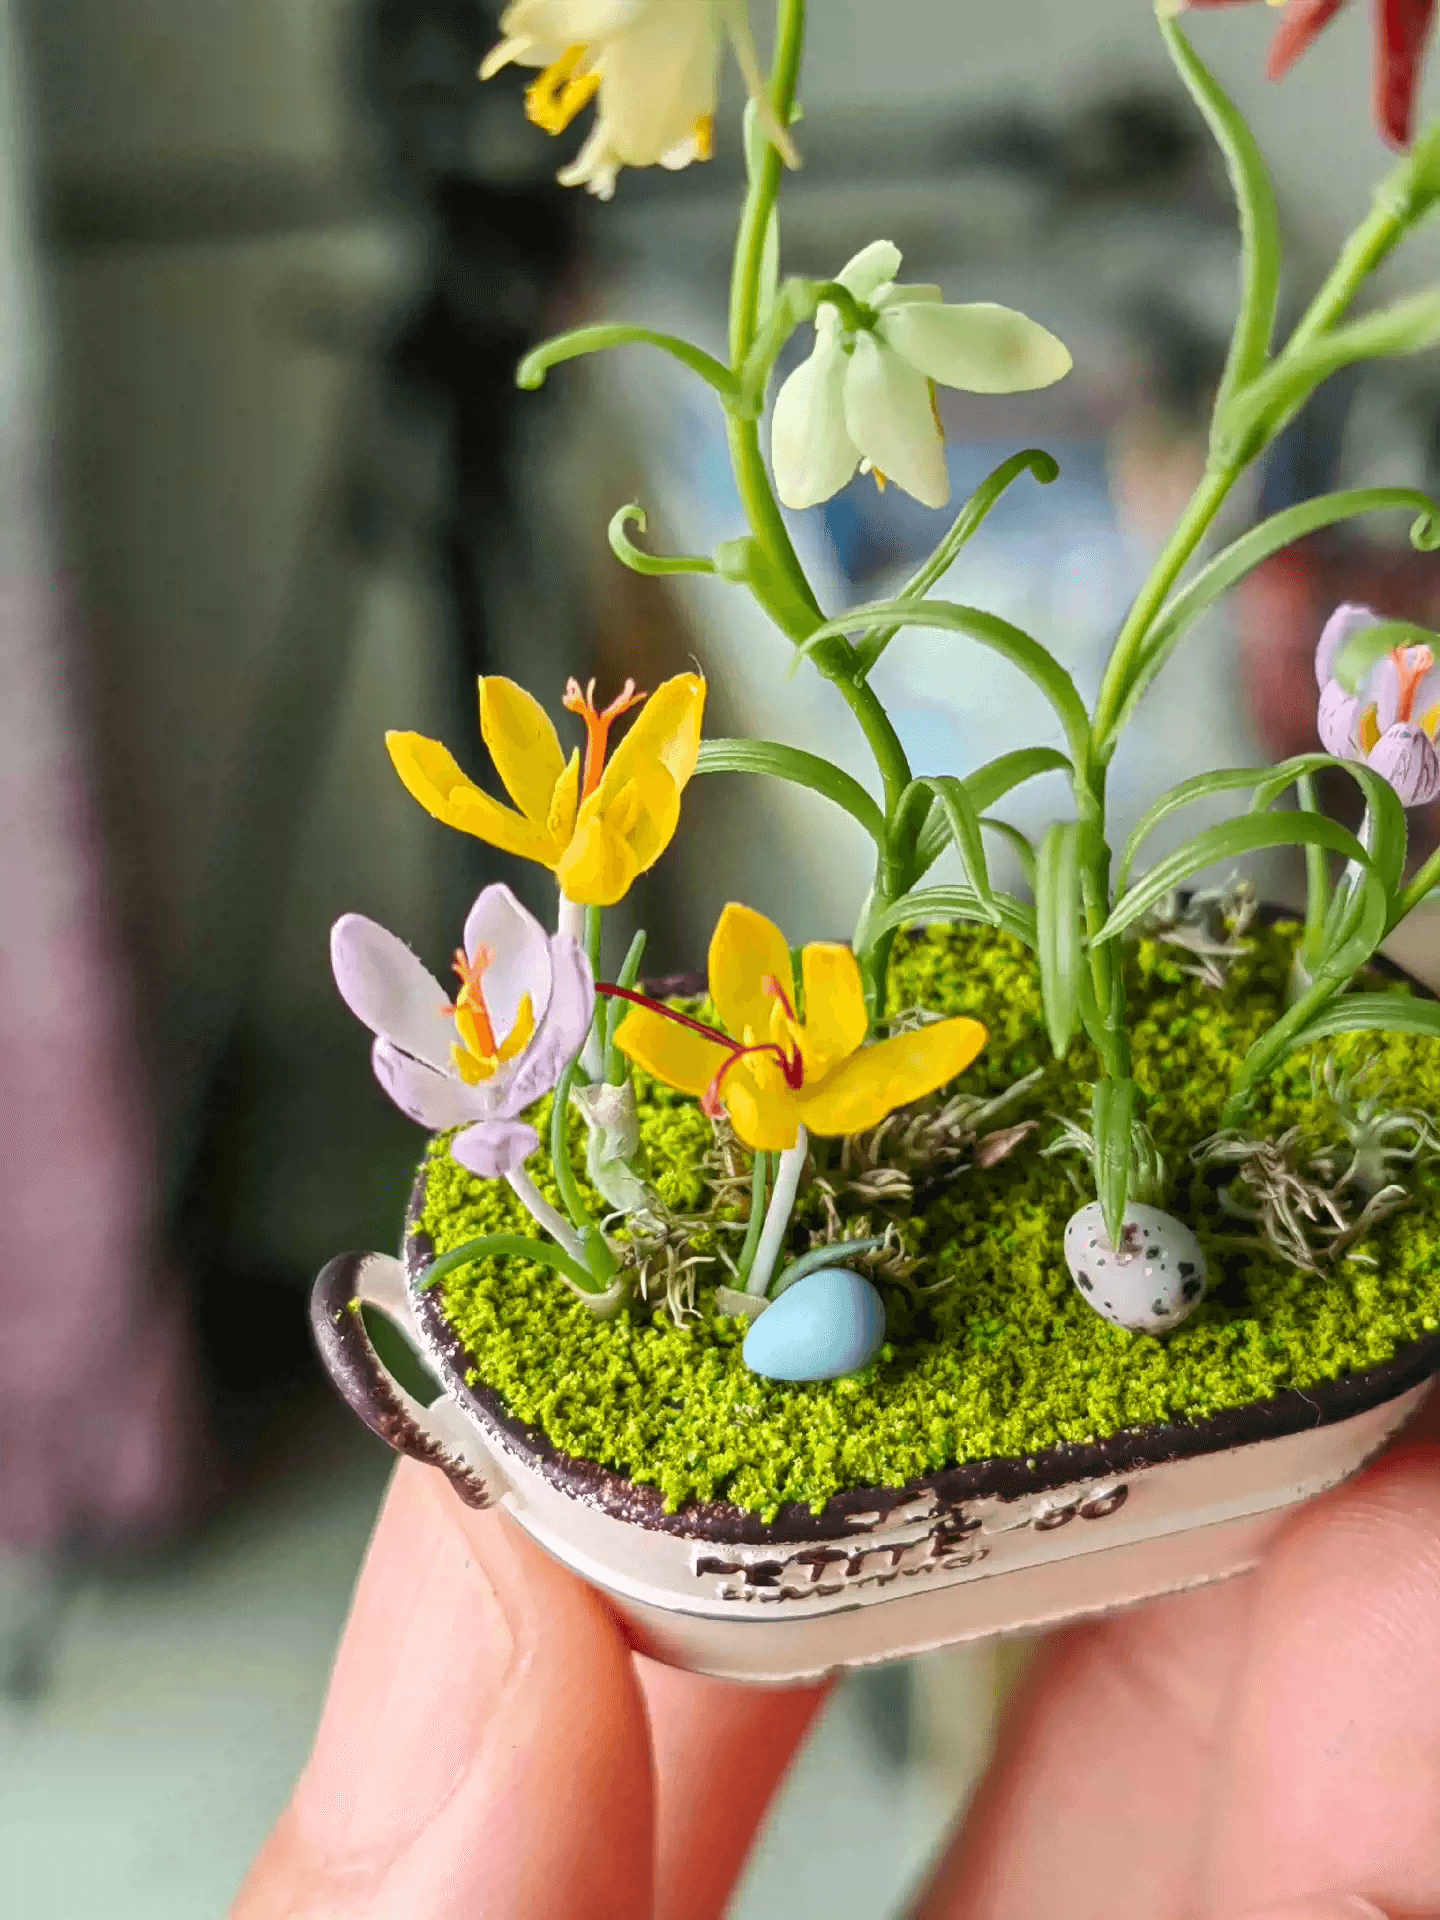 Fritillarias flower from mid to late spring and are perennial.  Crocus is a wonderful bulb to plant underneath trees or in a landscape bed.  Fritillaria thunbergii, Fritillaria meleagris, Crocus sativus and bird's eggs in clay planter.  Material: Handmade from Clay